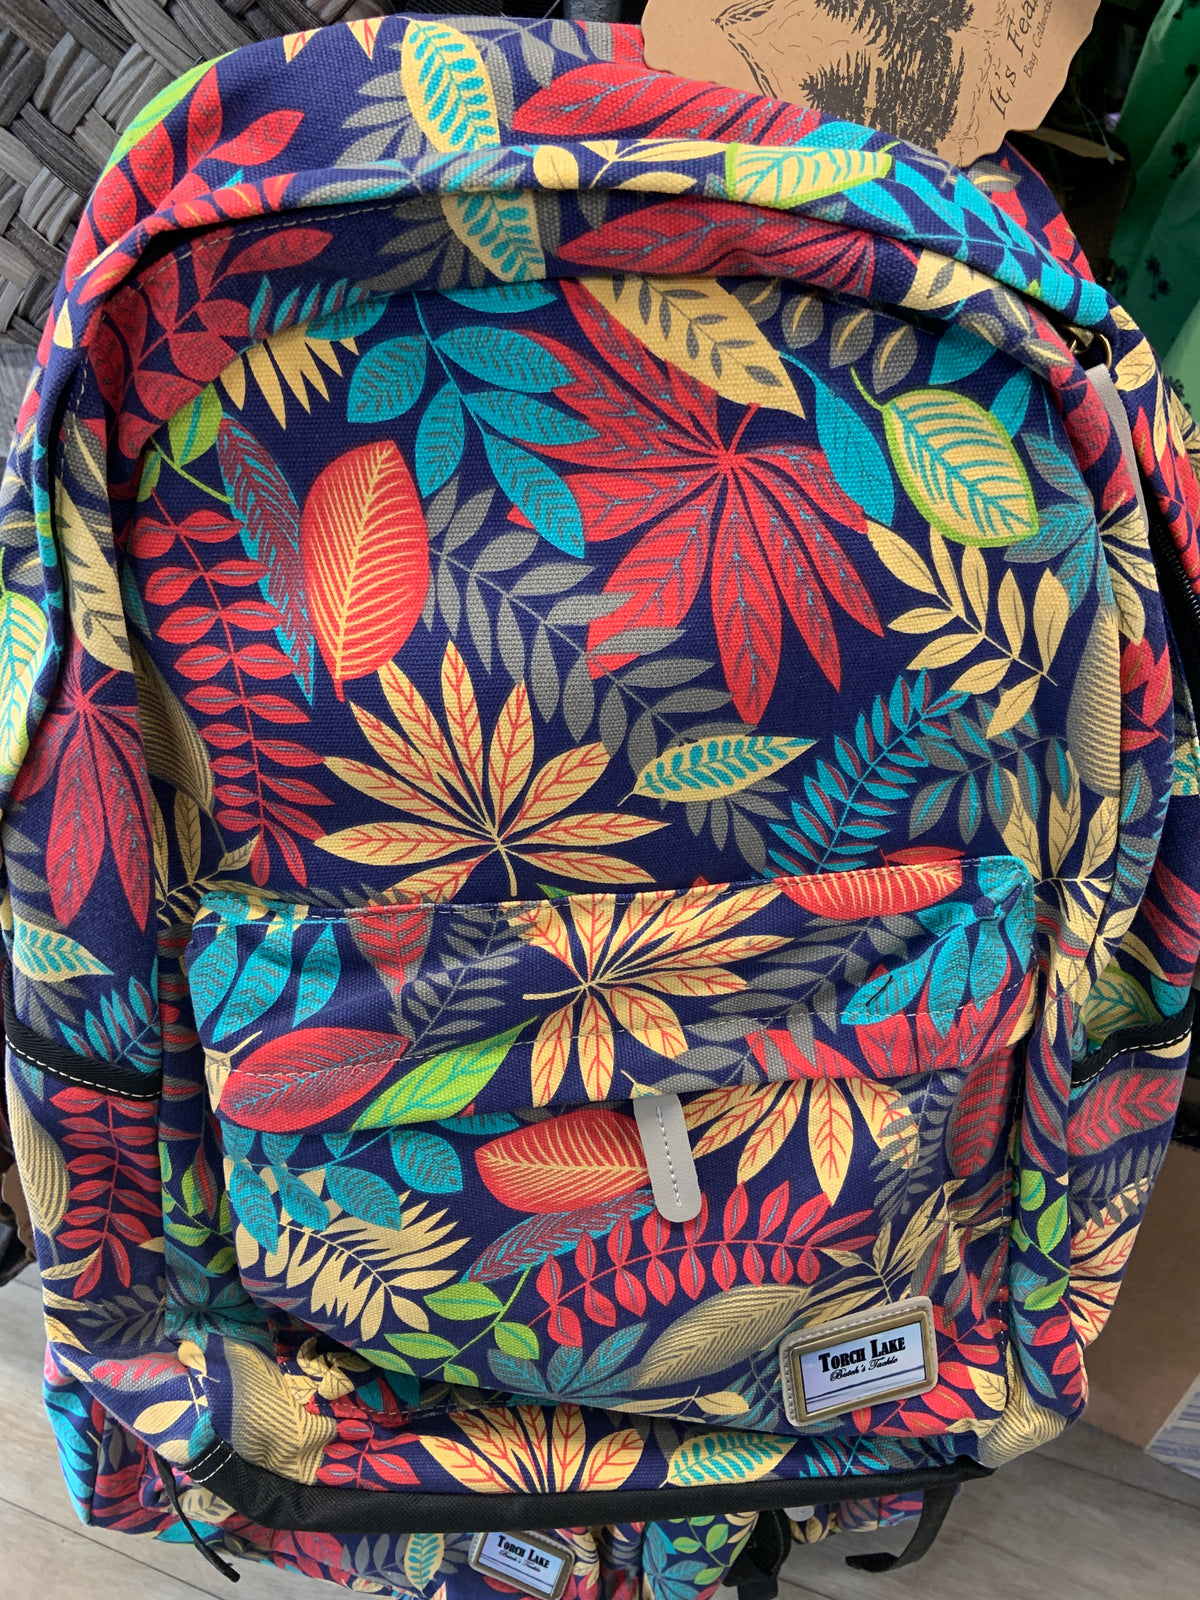 Welcome to the TL Jungle Backpack